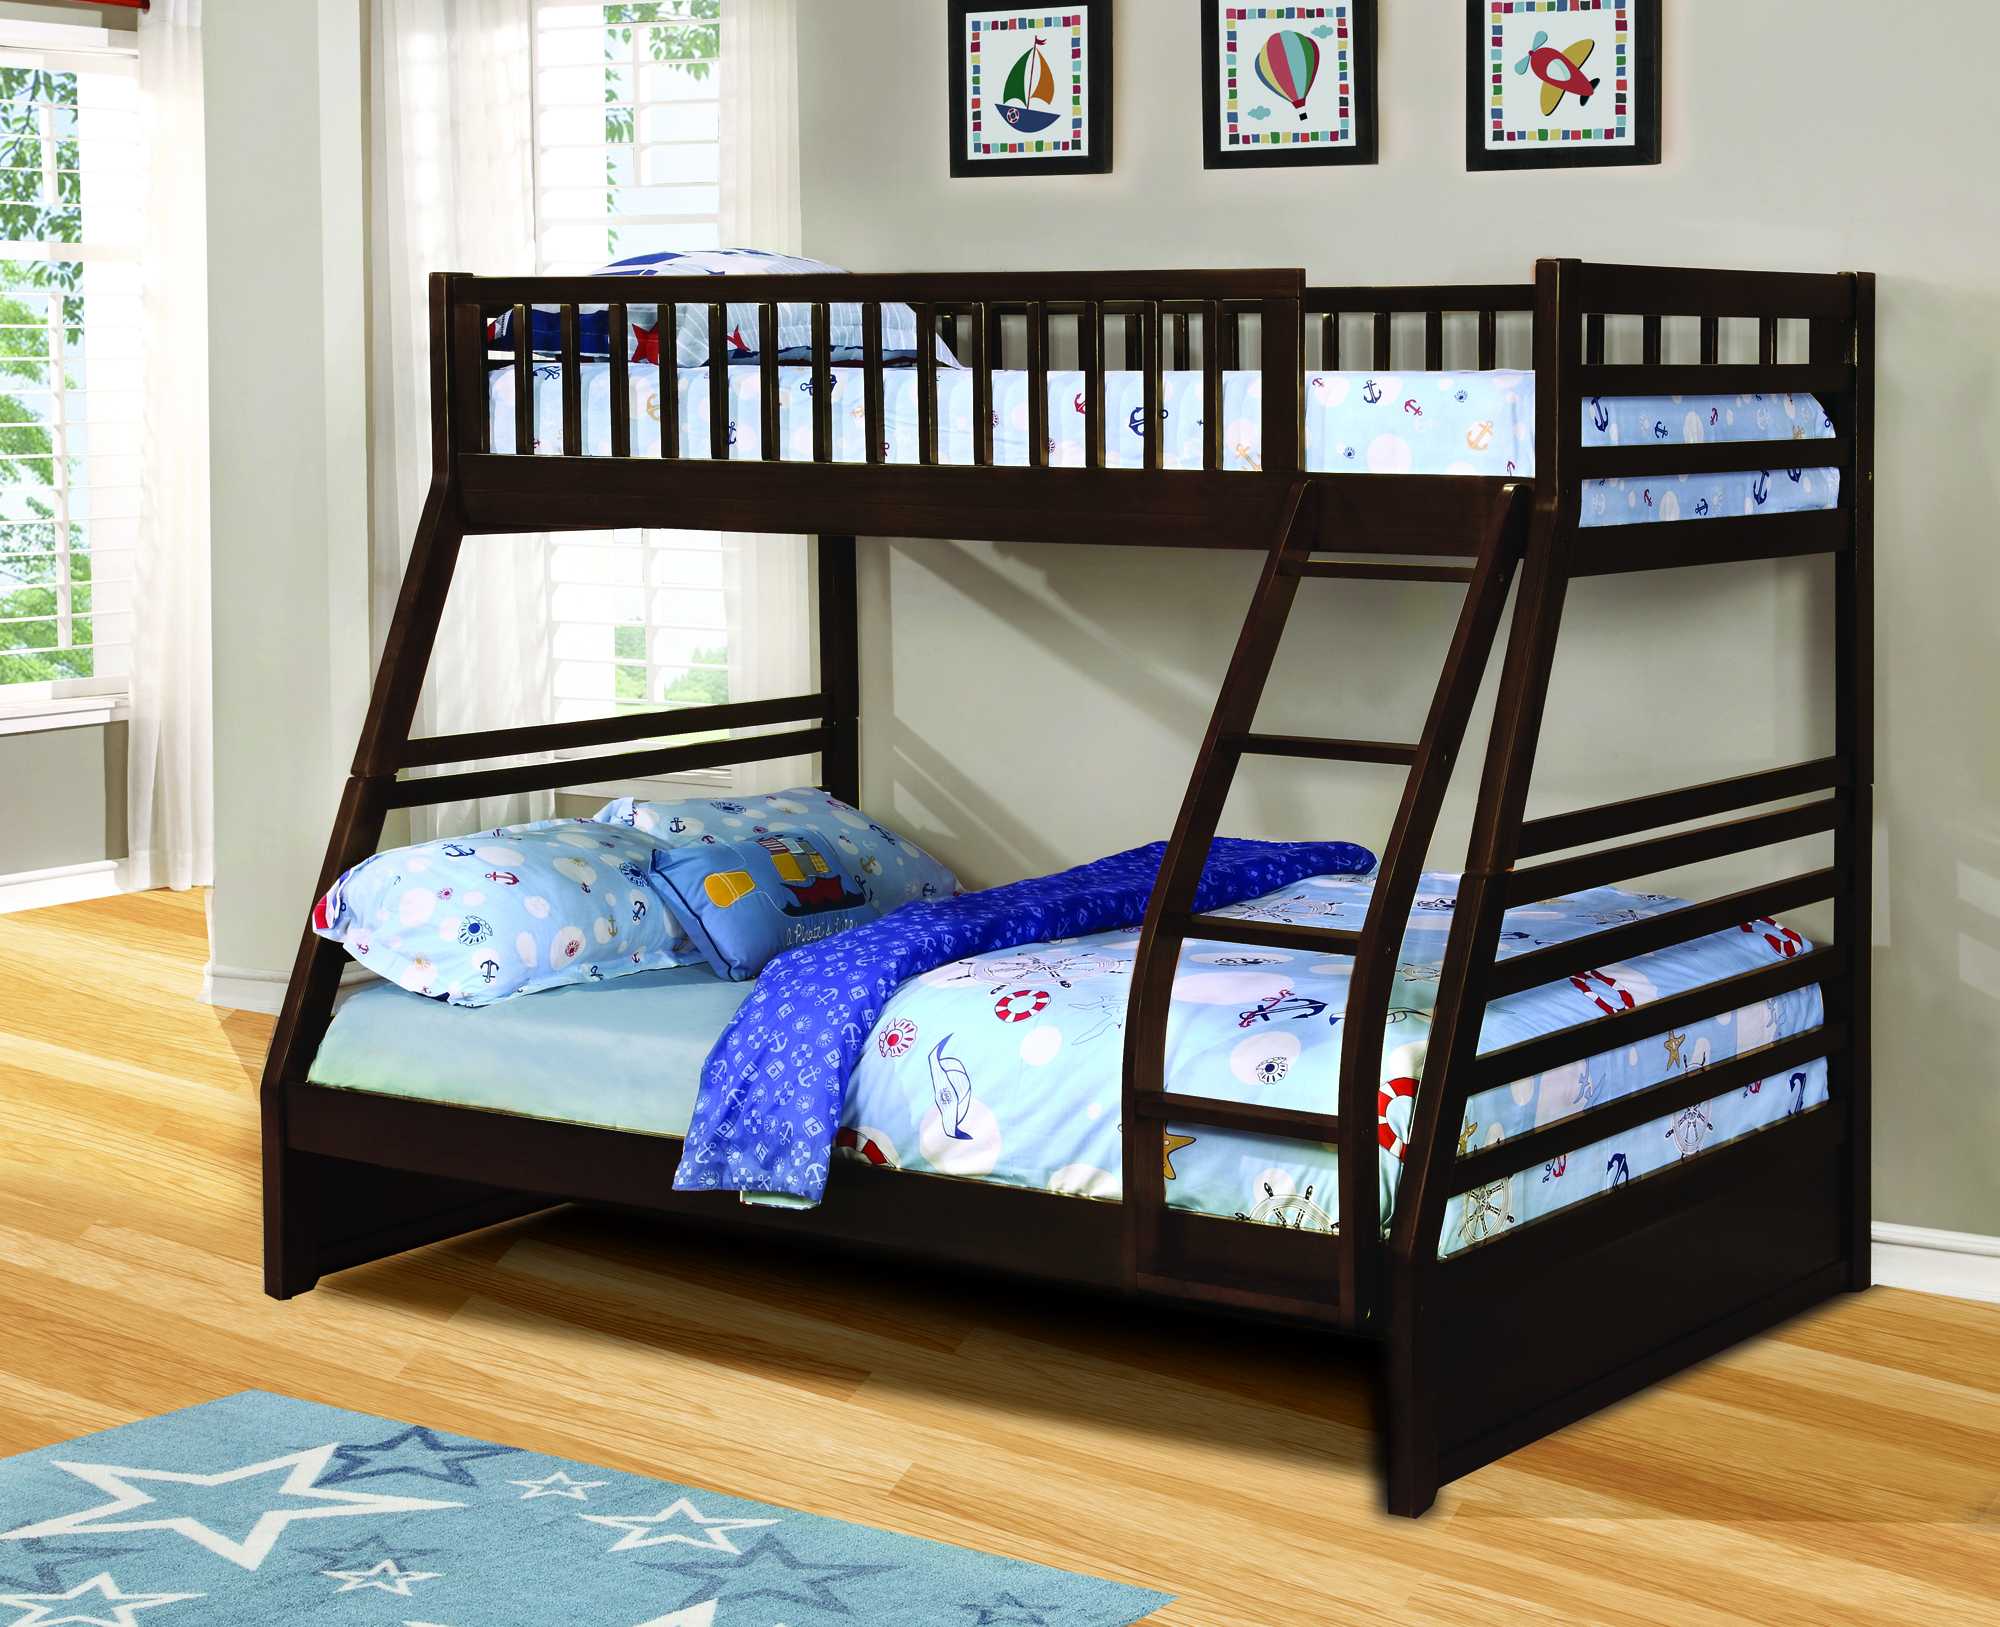 78.75" X 42.5-57.25" X 65" Brown Manufactured Wood and Solid Wood Twin or Full Bunk Bed